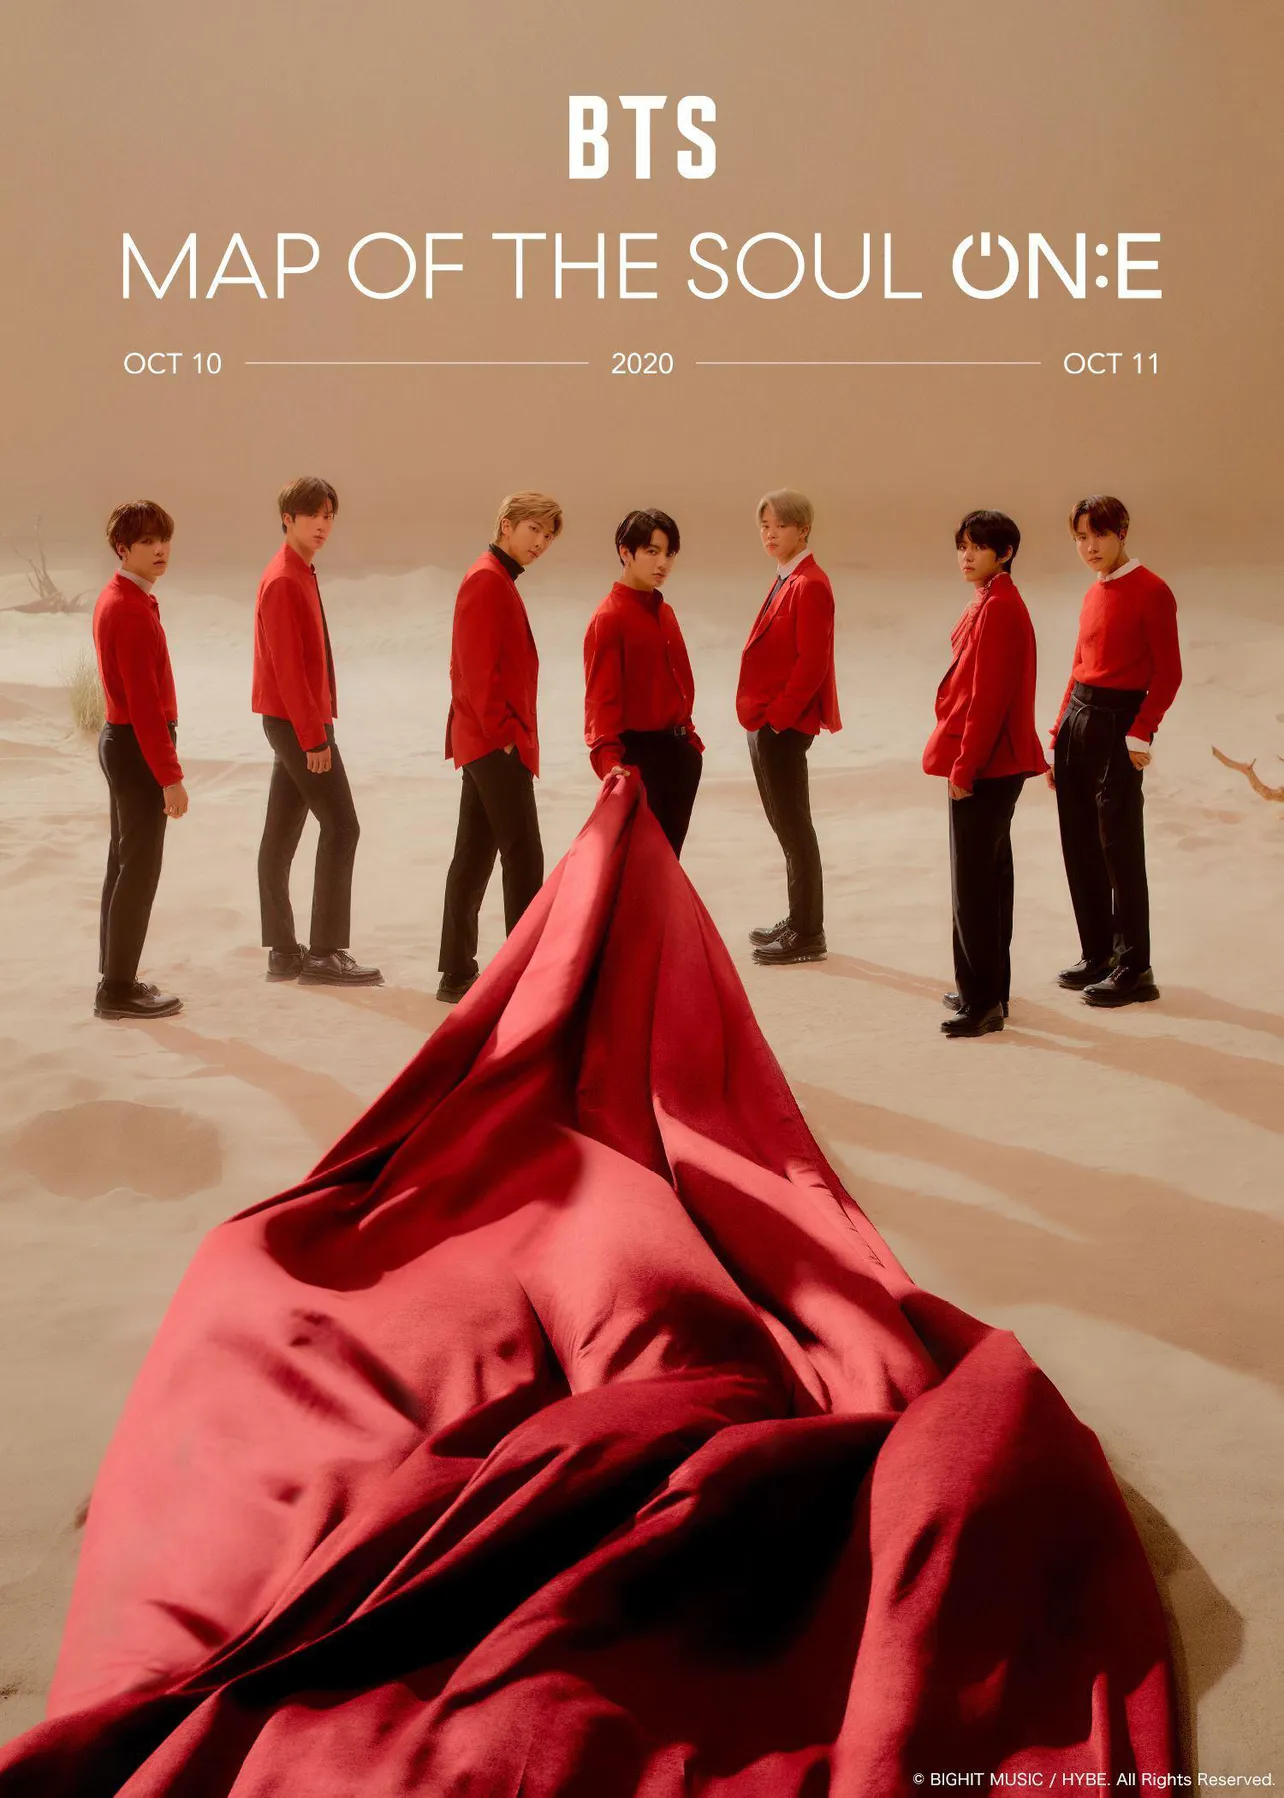 BTS MAP OF THE SOUL ON:E